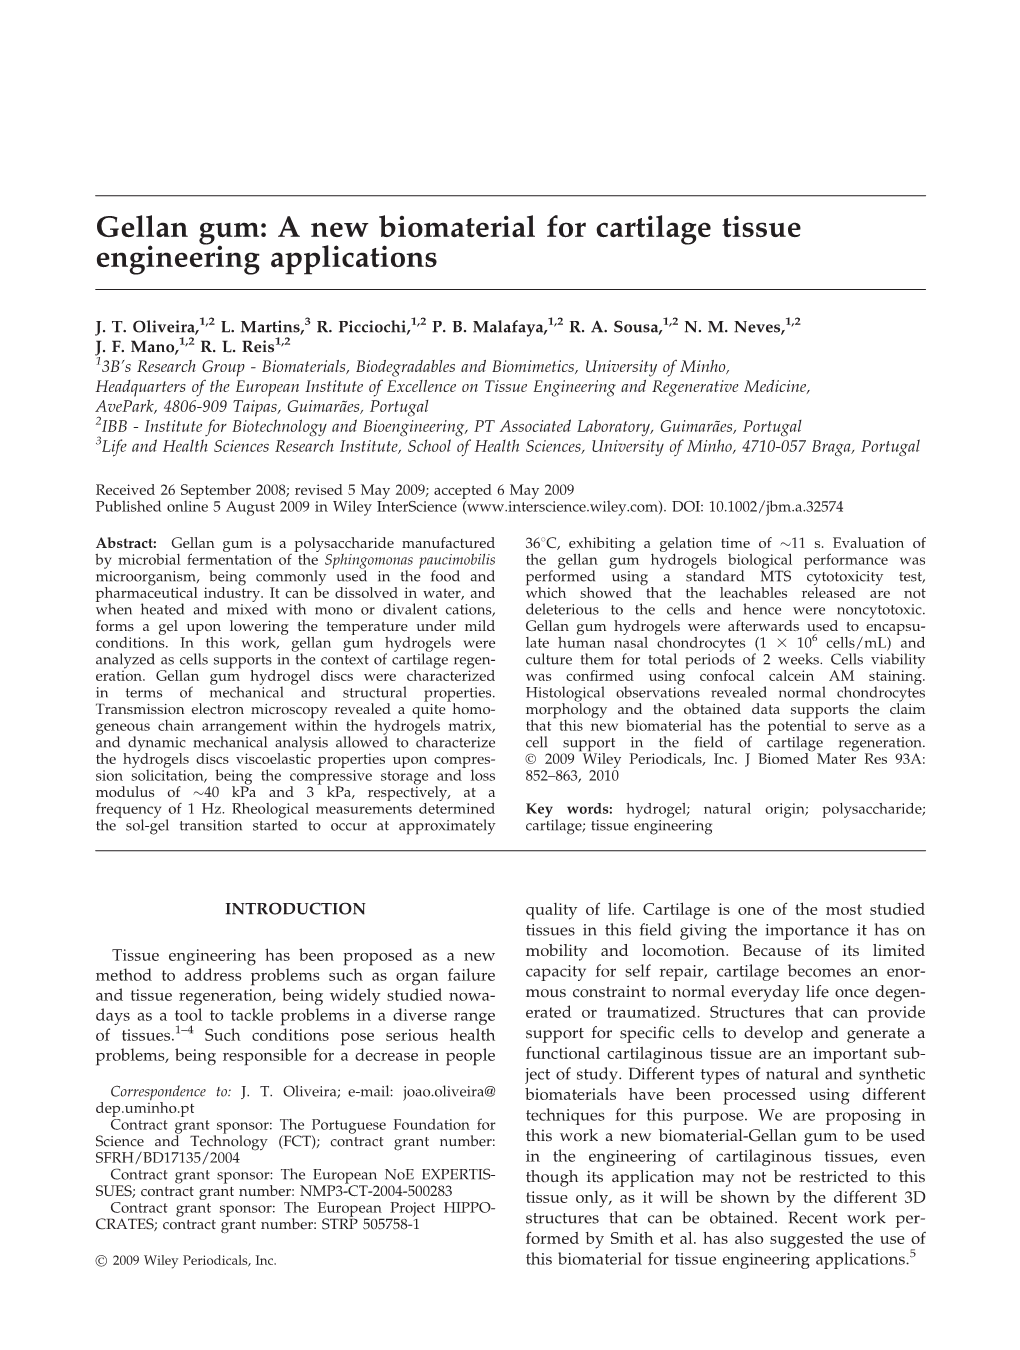 Gellan Gum: a New Biomaterial for Cartilage Tissue Engineering Applications